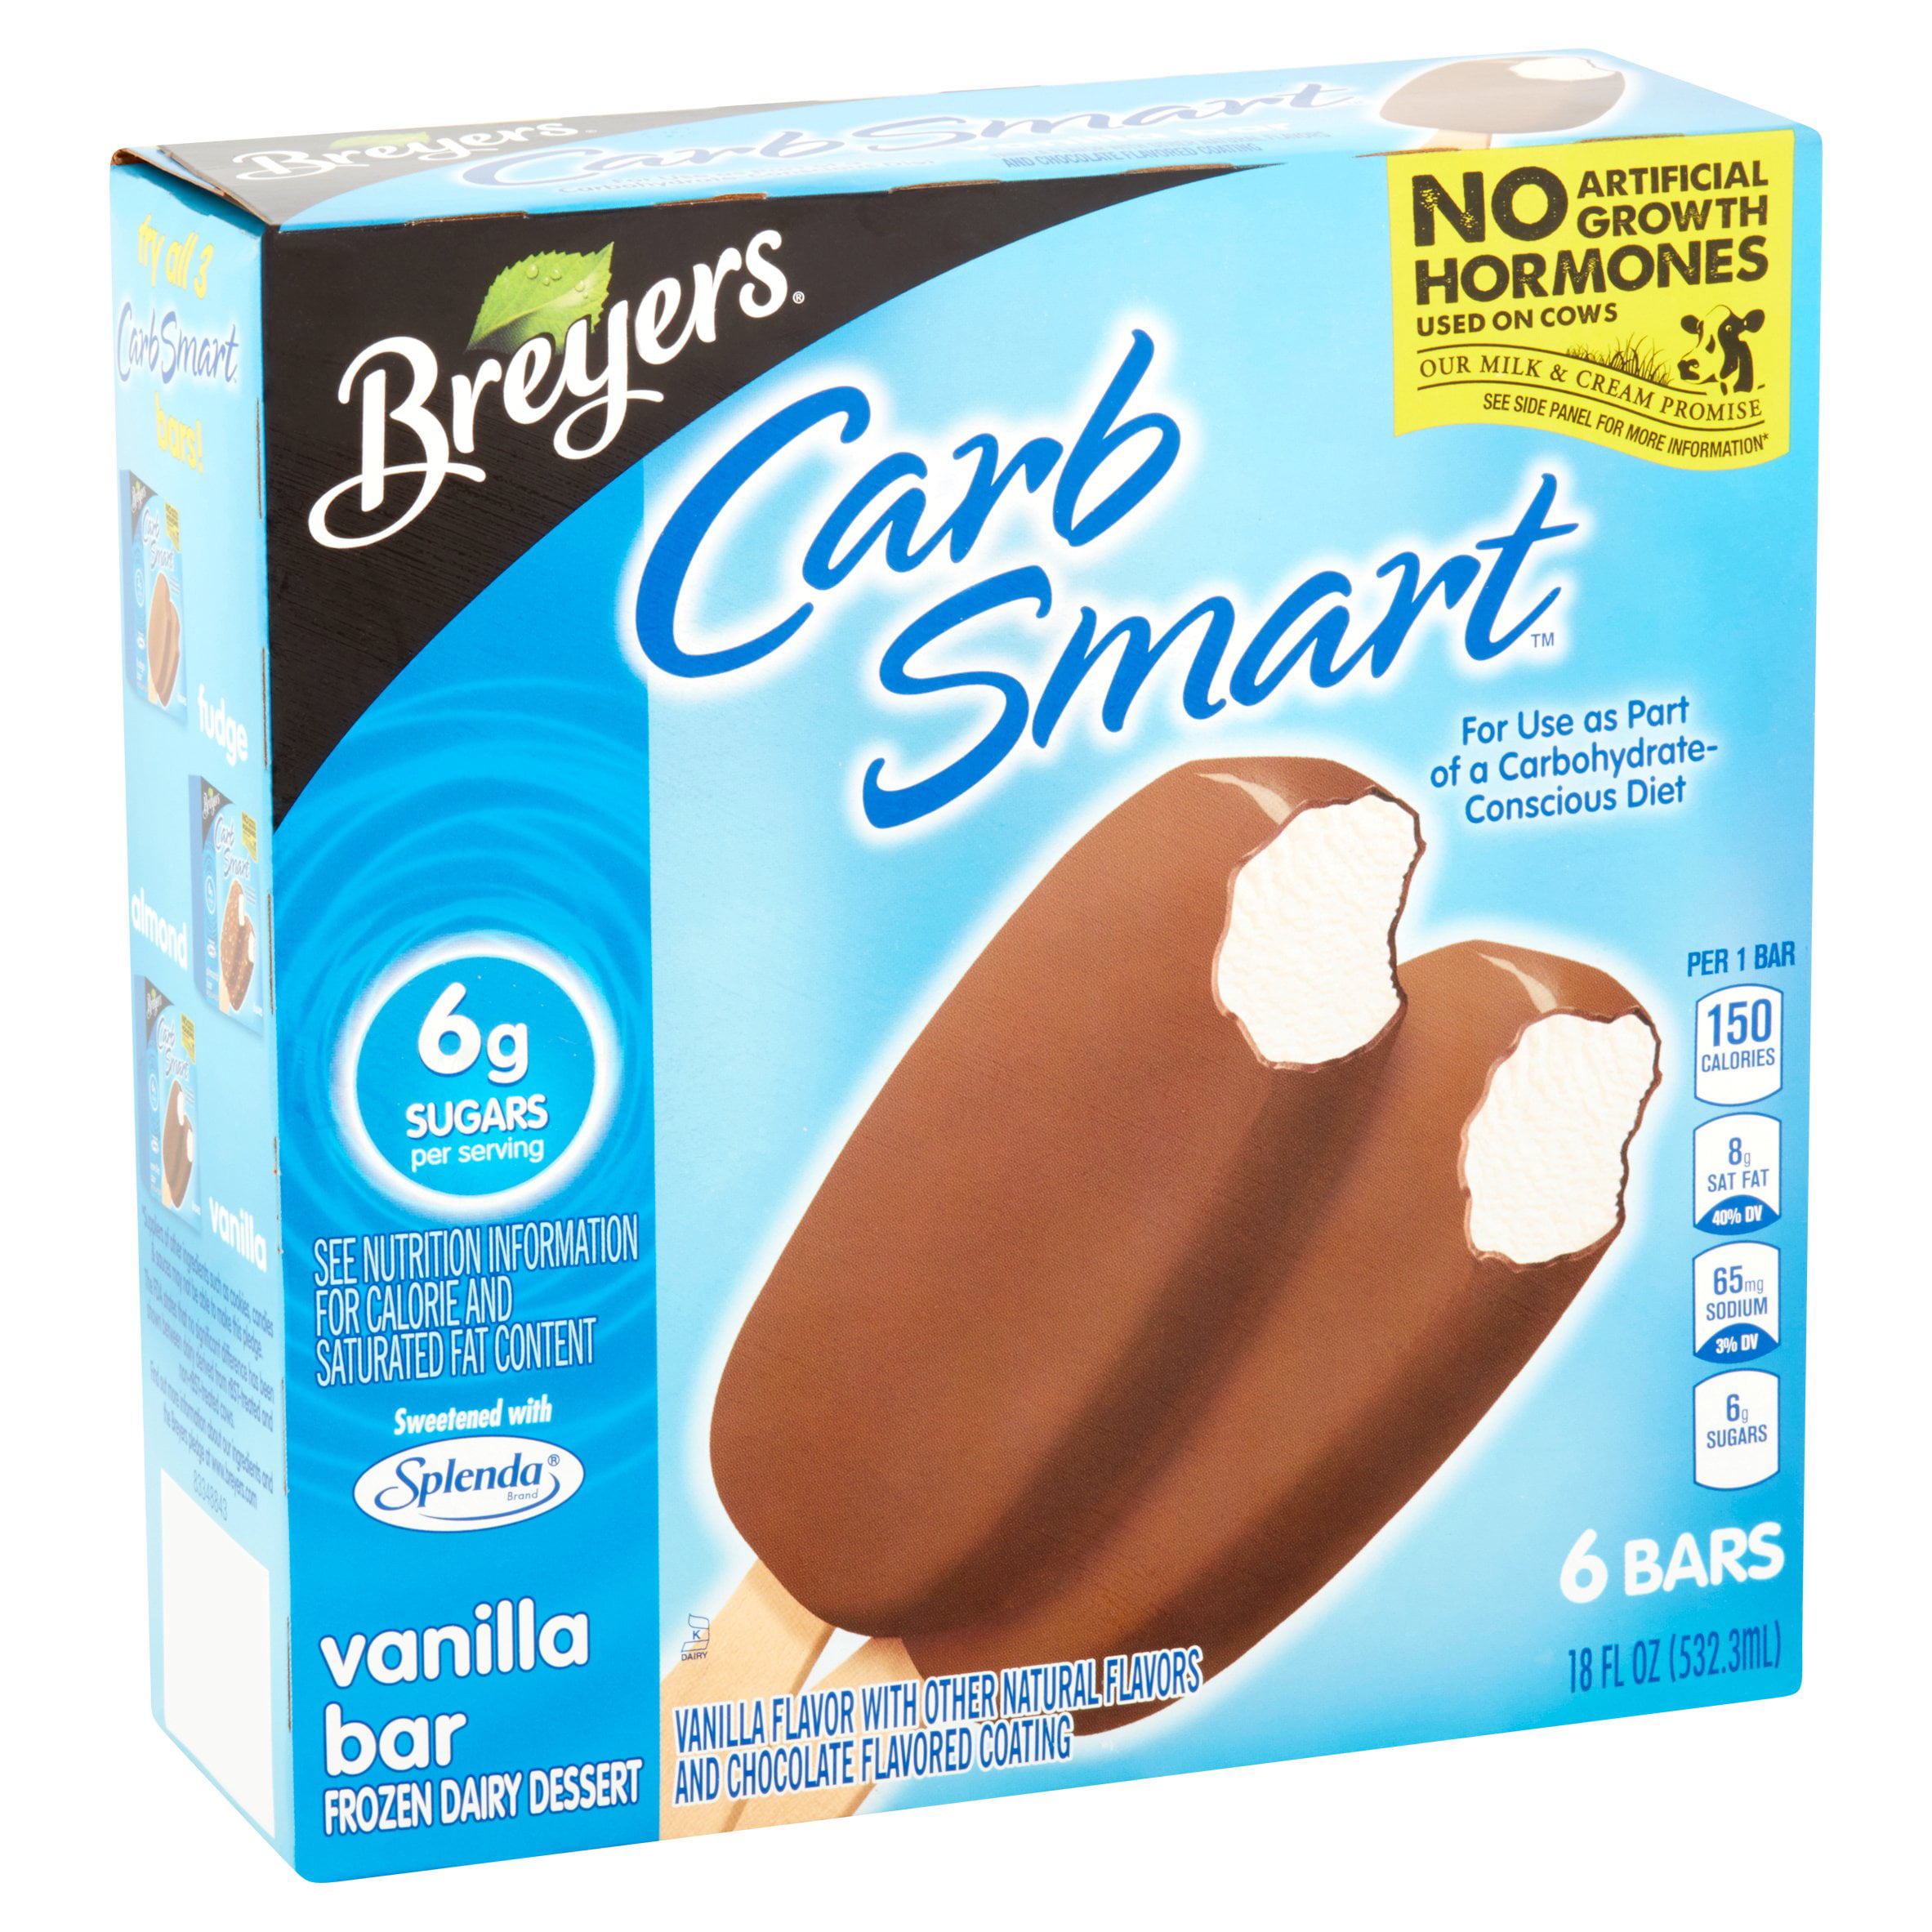 Breyers Carb Smart Ice Cream Nutrition Facts - Nutrition ...